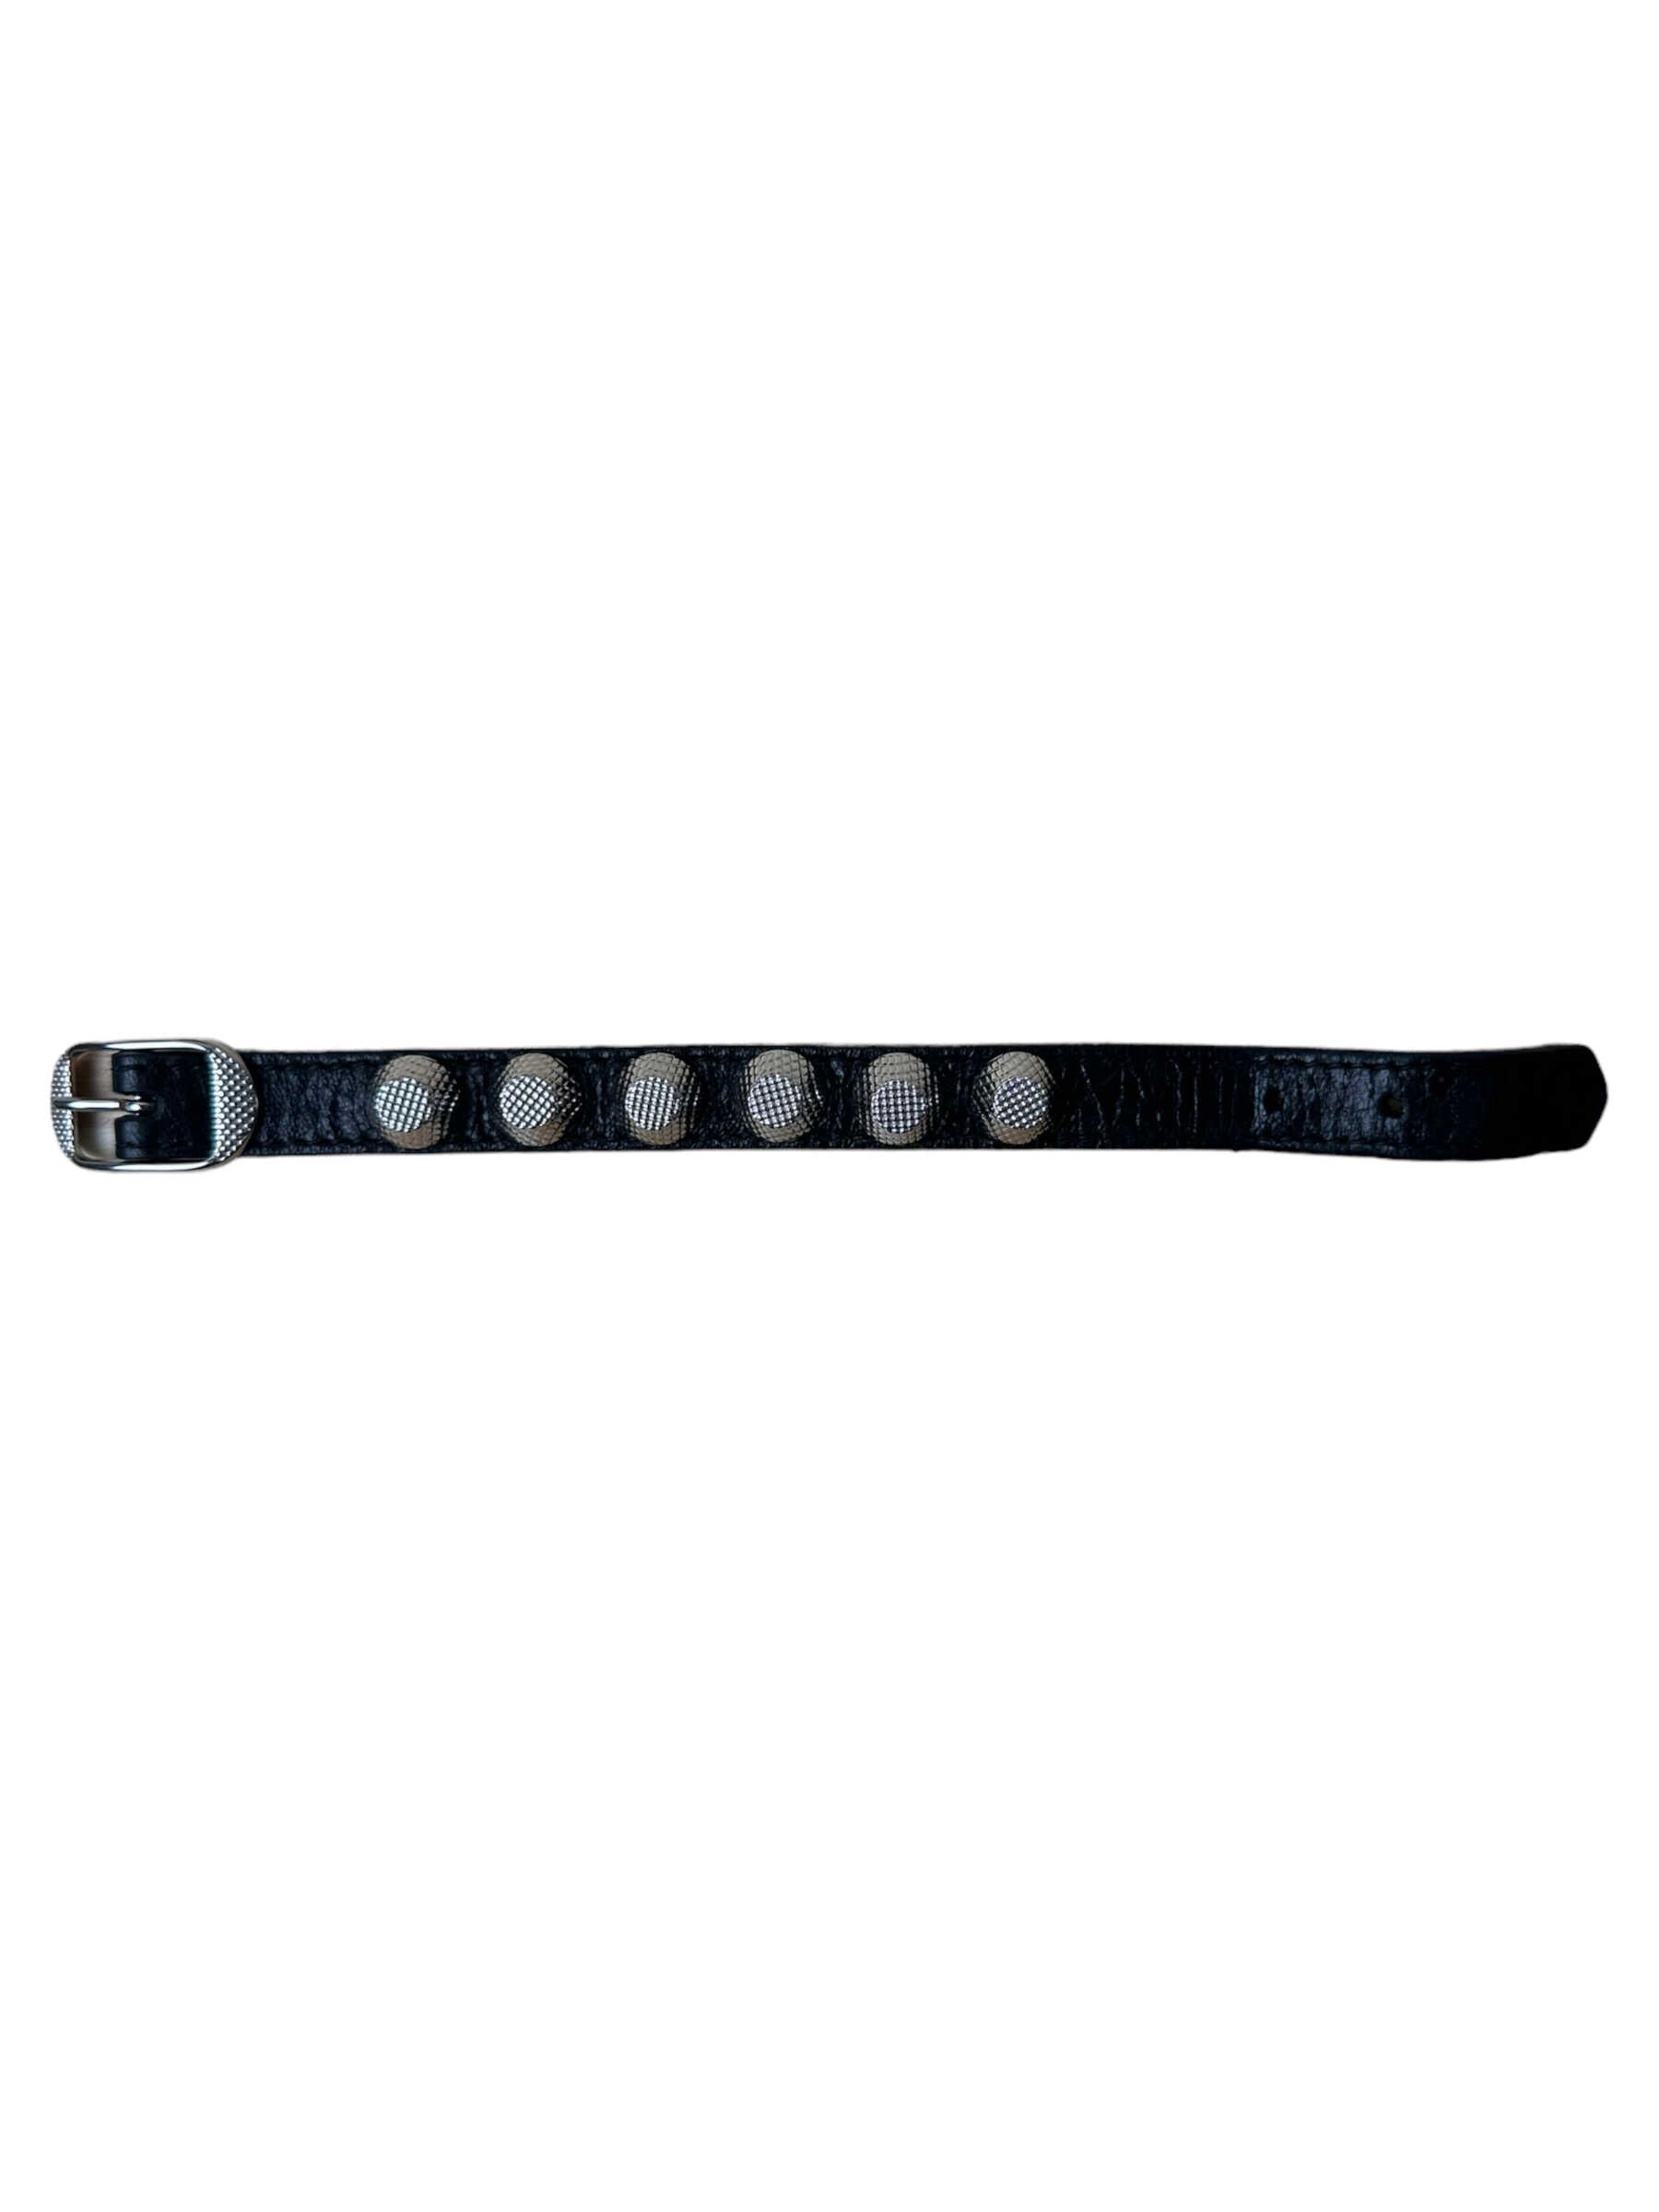 Balenciaga Black Leather Studded Bracelet— Genuine Design Luxury Consignment for Men. New & Pre-Owned Clothing, Shoes, & Accessories. Calgary, Canada